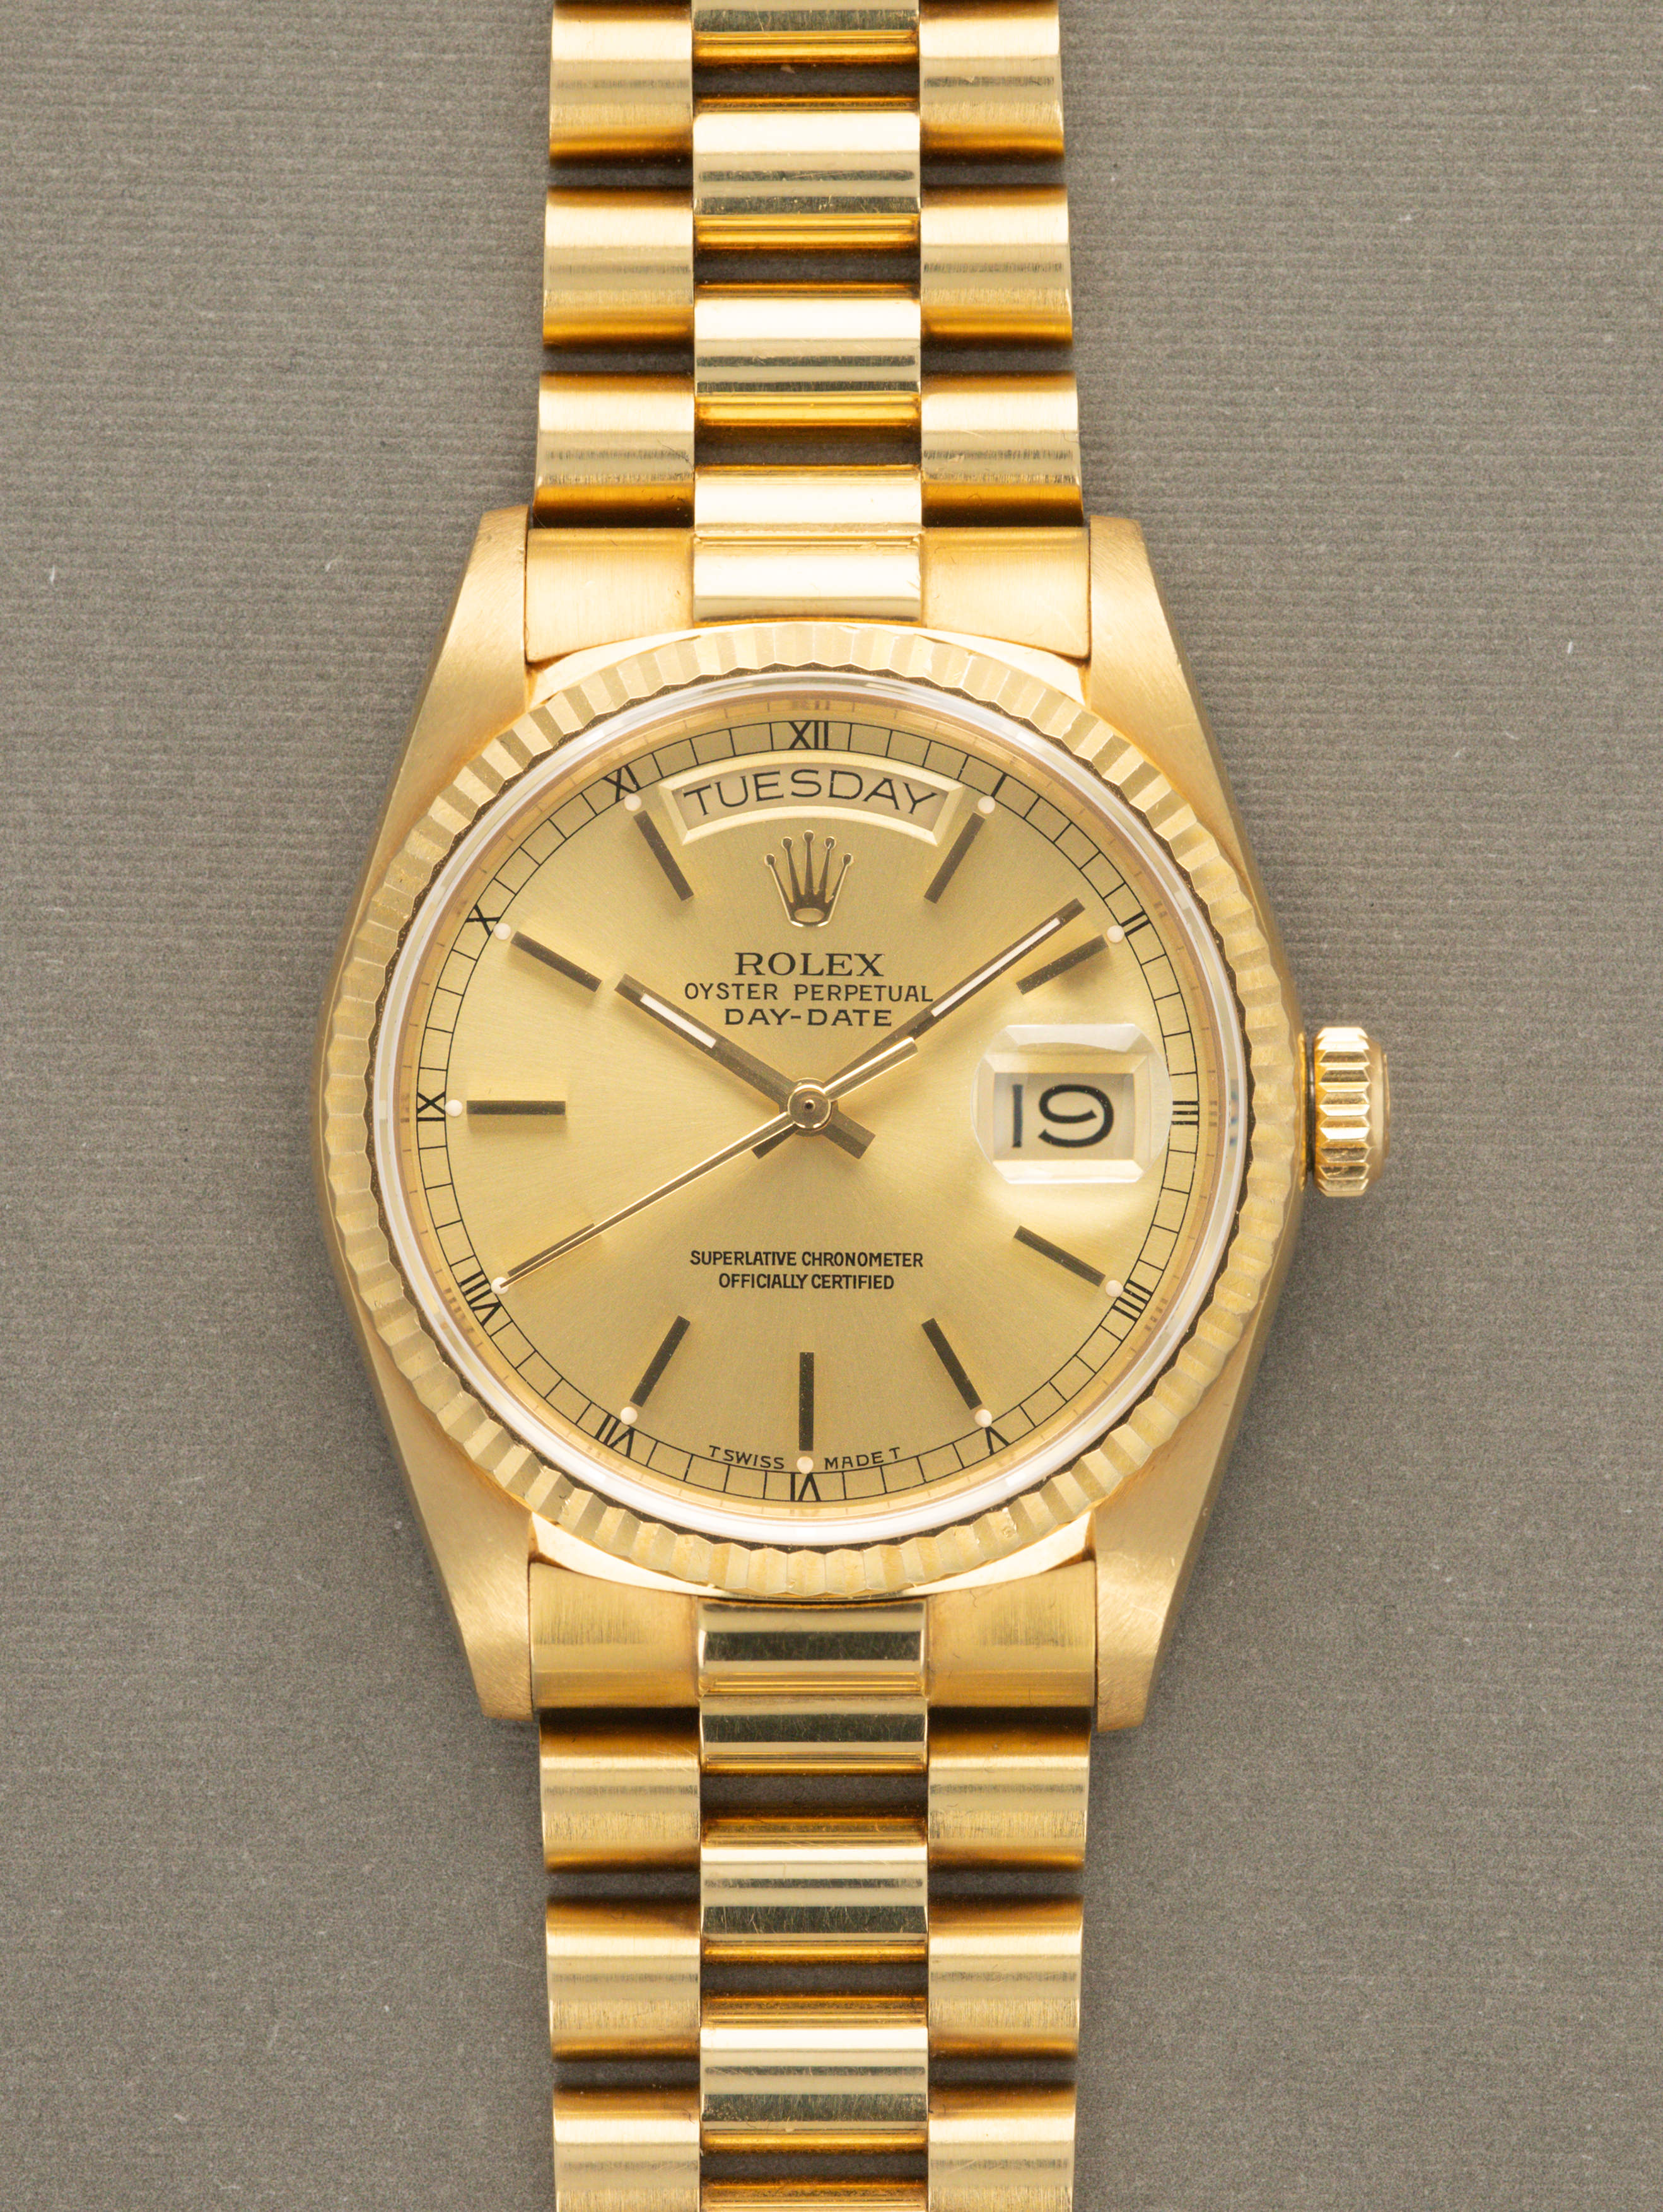 Rolex Day-Date Ref. 18038 - 'Texas Timex' Unpolished